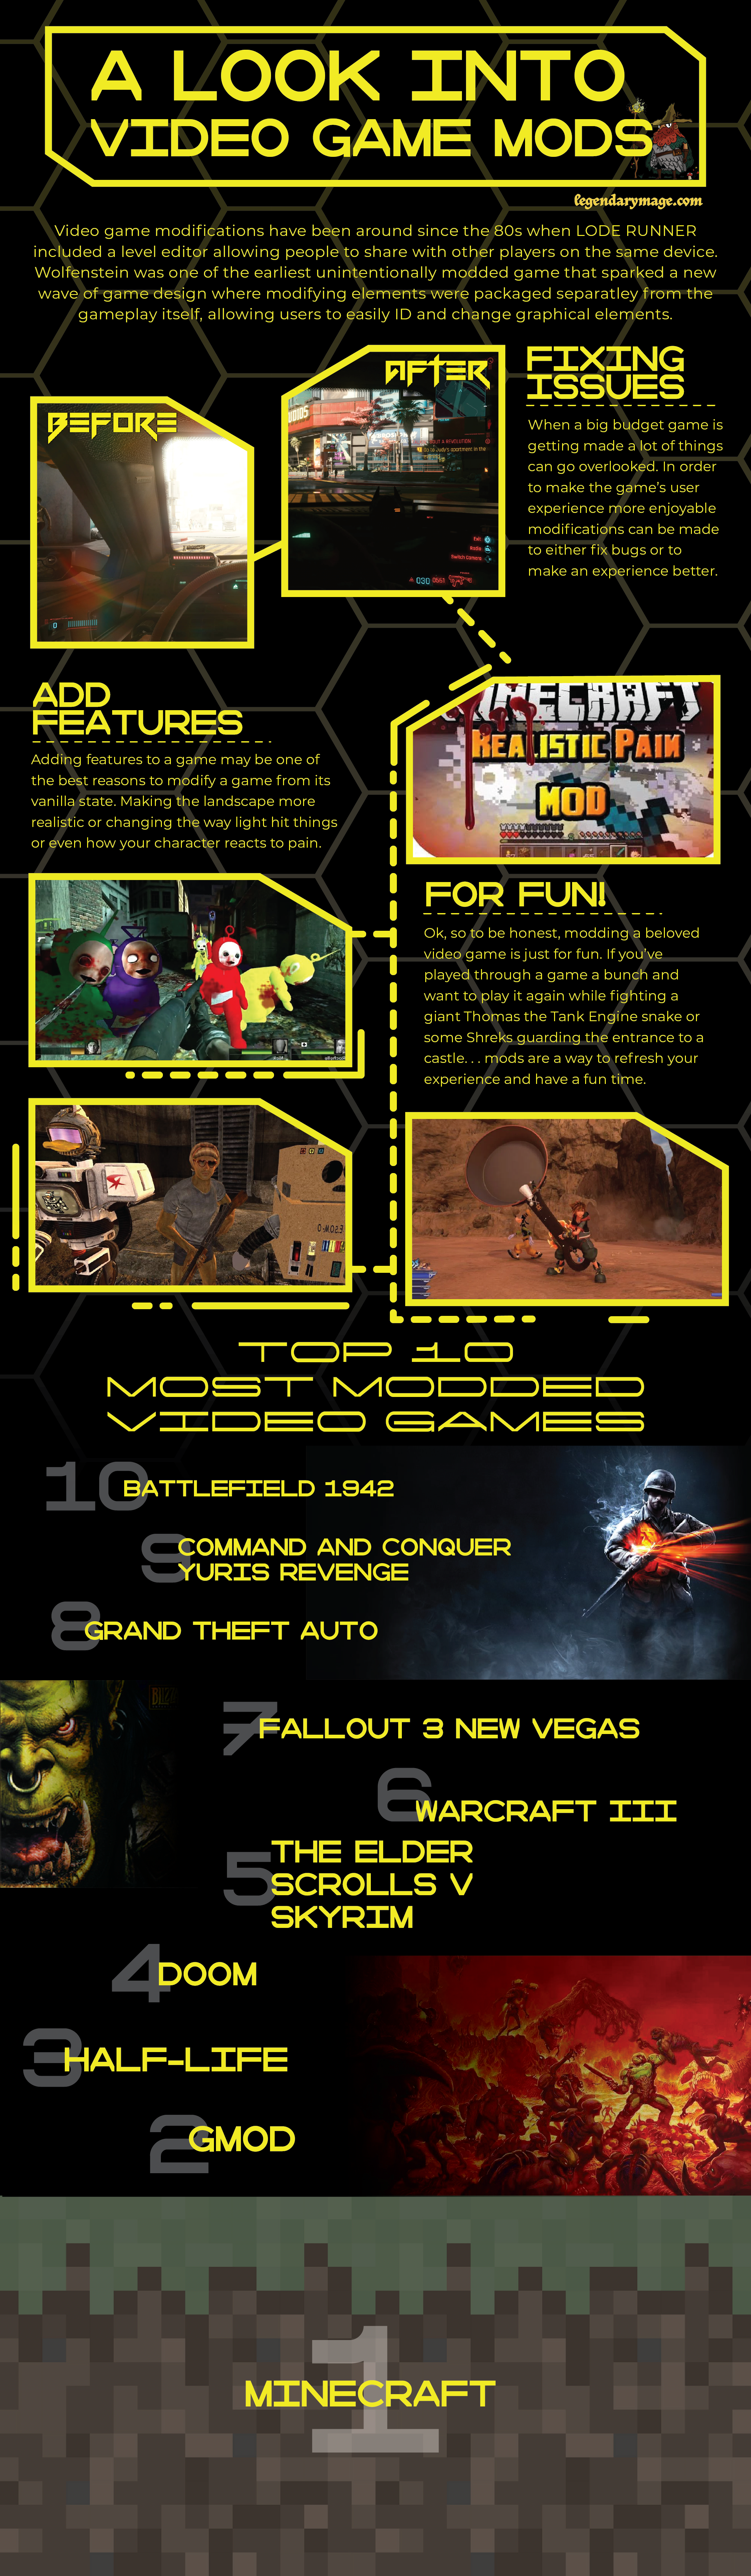 The 10 MOST Modded Video Games of All Time | Daily Infographic